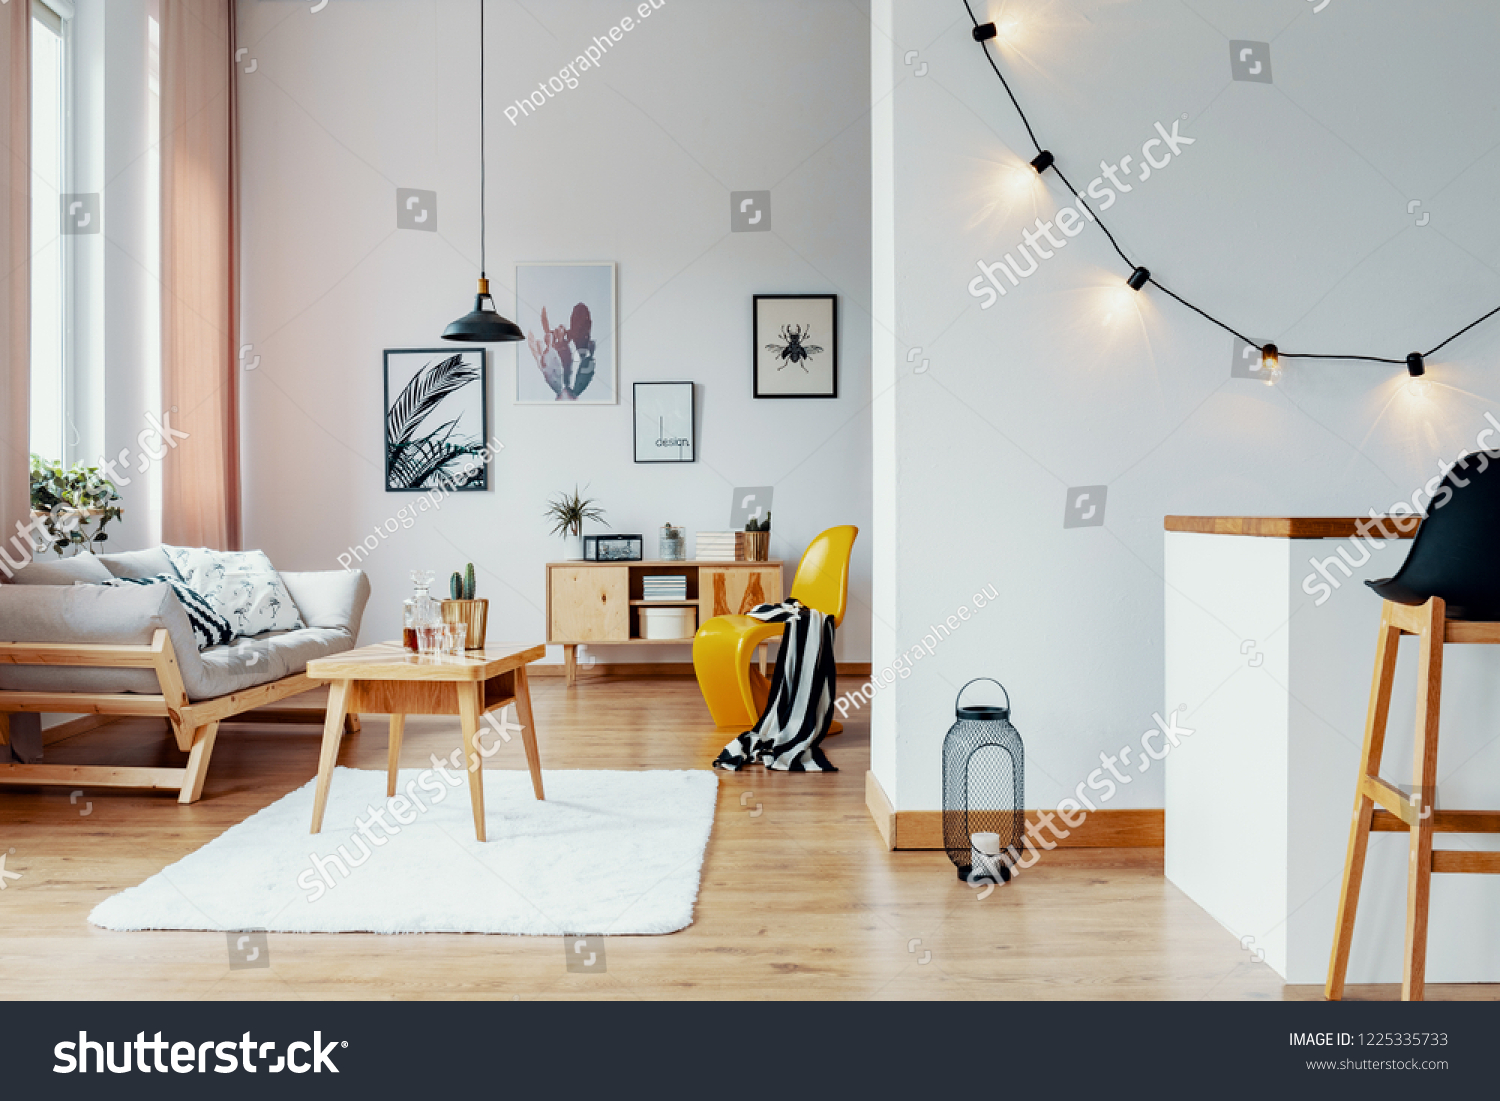 Open space flat interior with posters and lights on the wall, wooden coffee table with cactus and whiskey in glass carafe in real photo with window with pastel pink drapes #1225335733